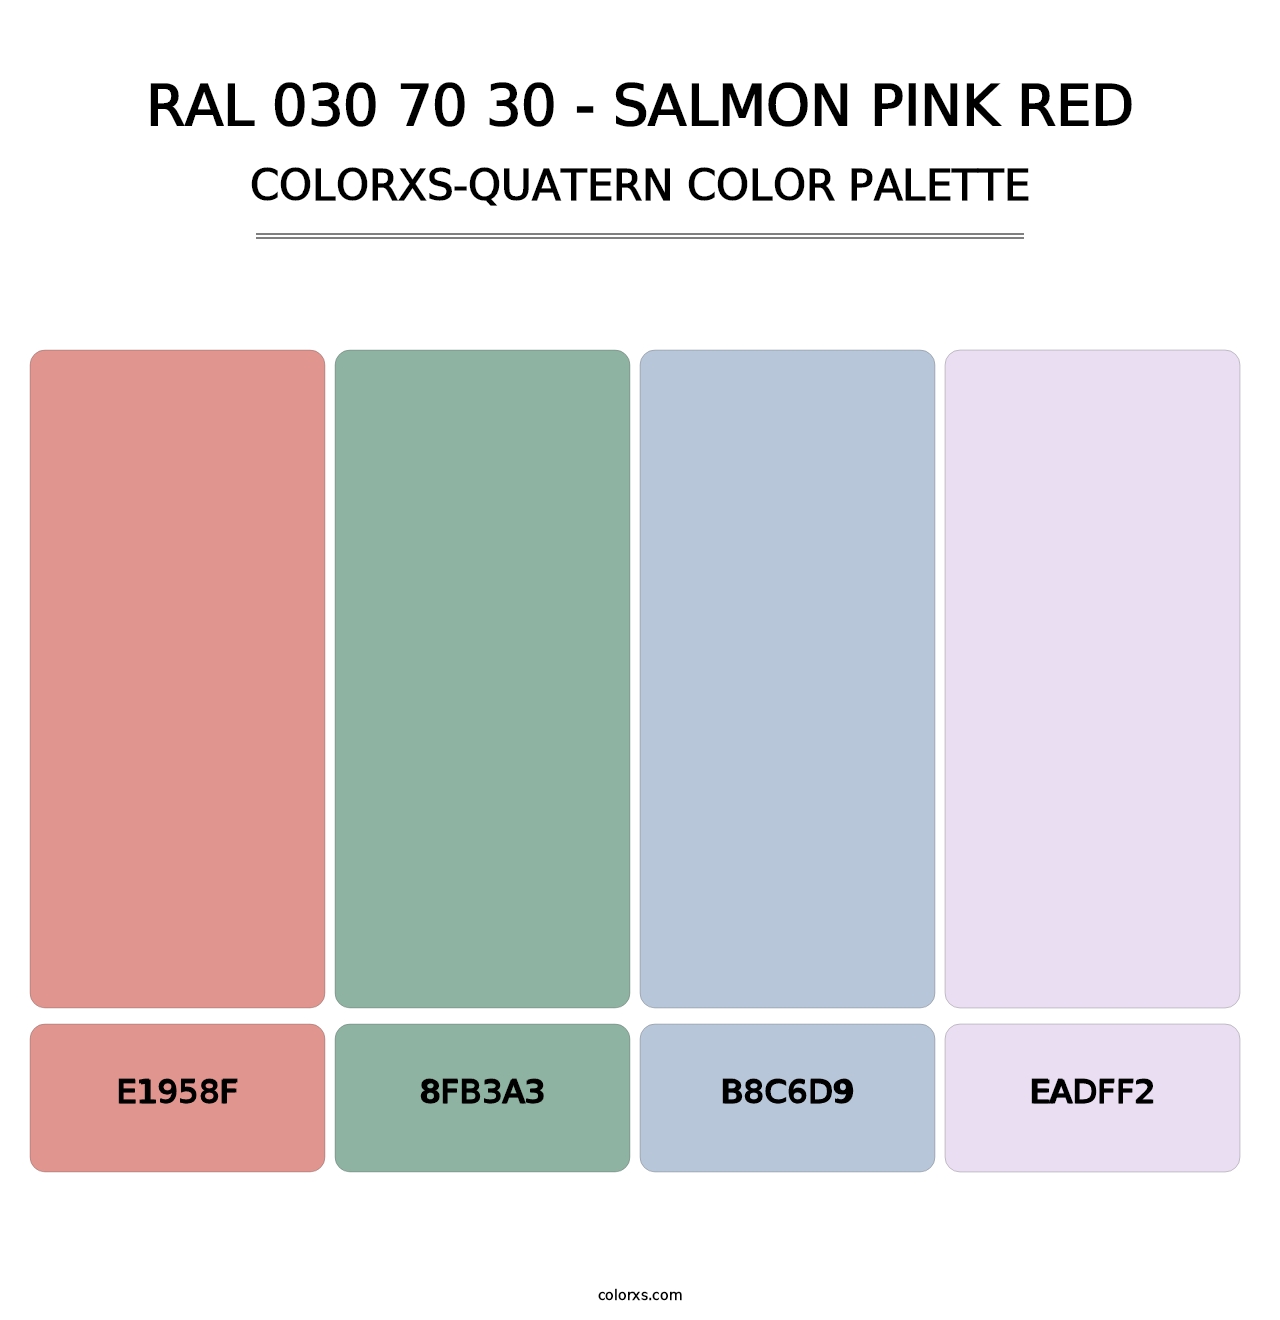 RAL 030 70 30 - Salmon Pink Red - Colorxs Quatern Palette